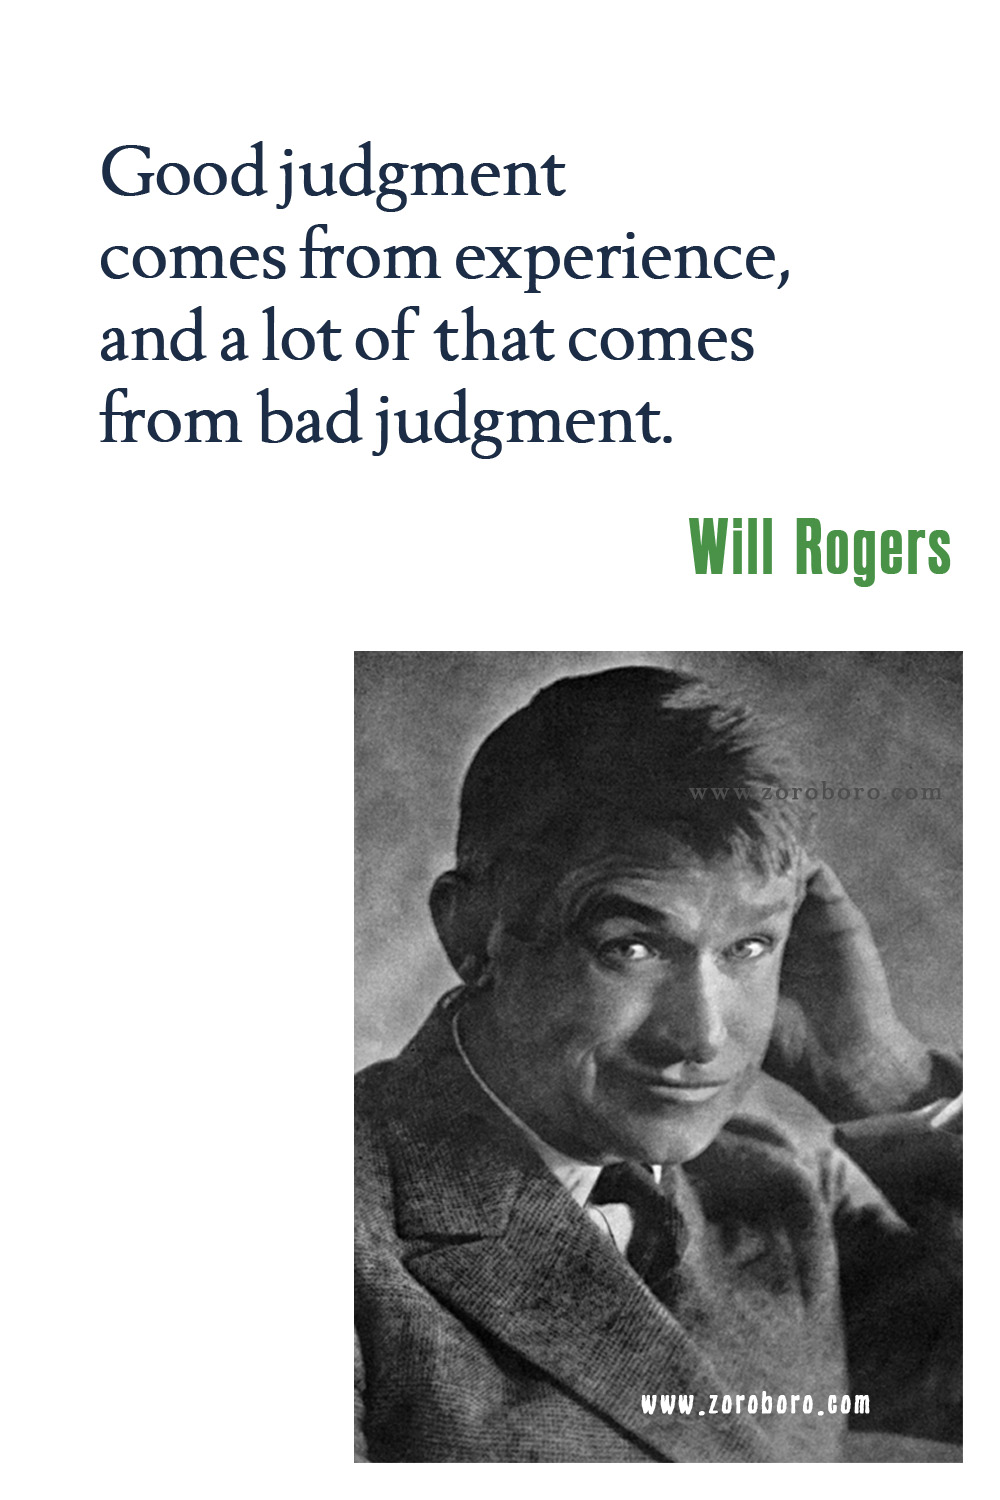 Will Rogers Quotes, Will Rogers Funny Quotes, Will Rogers Politics Humour Quotes, Will Rogers Comedian Quotes.